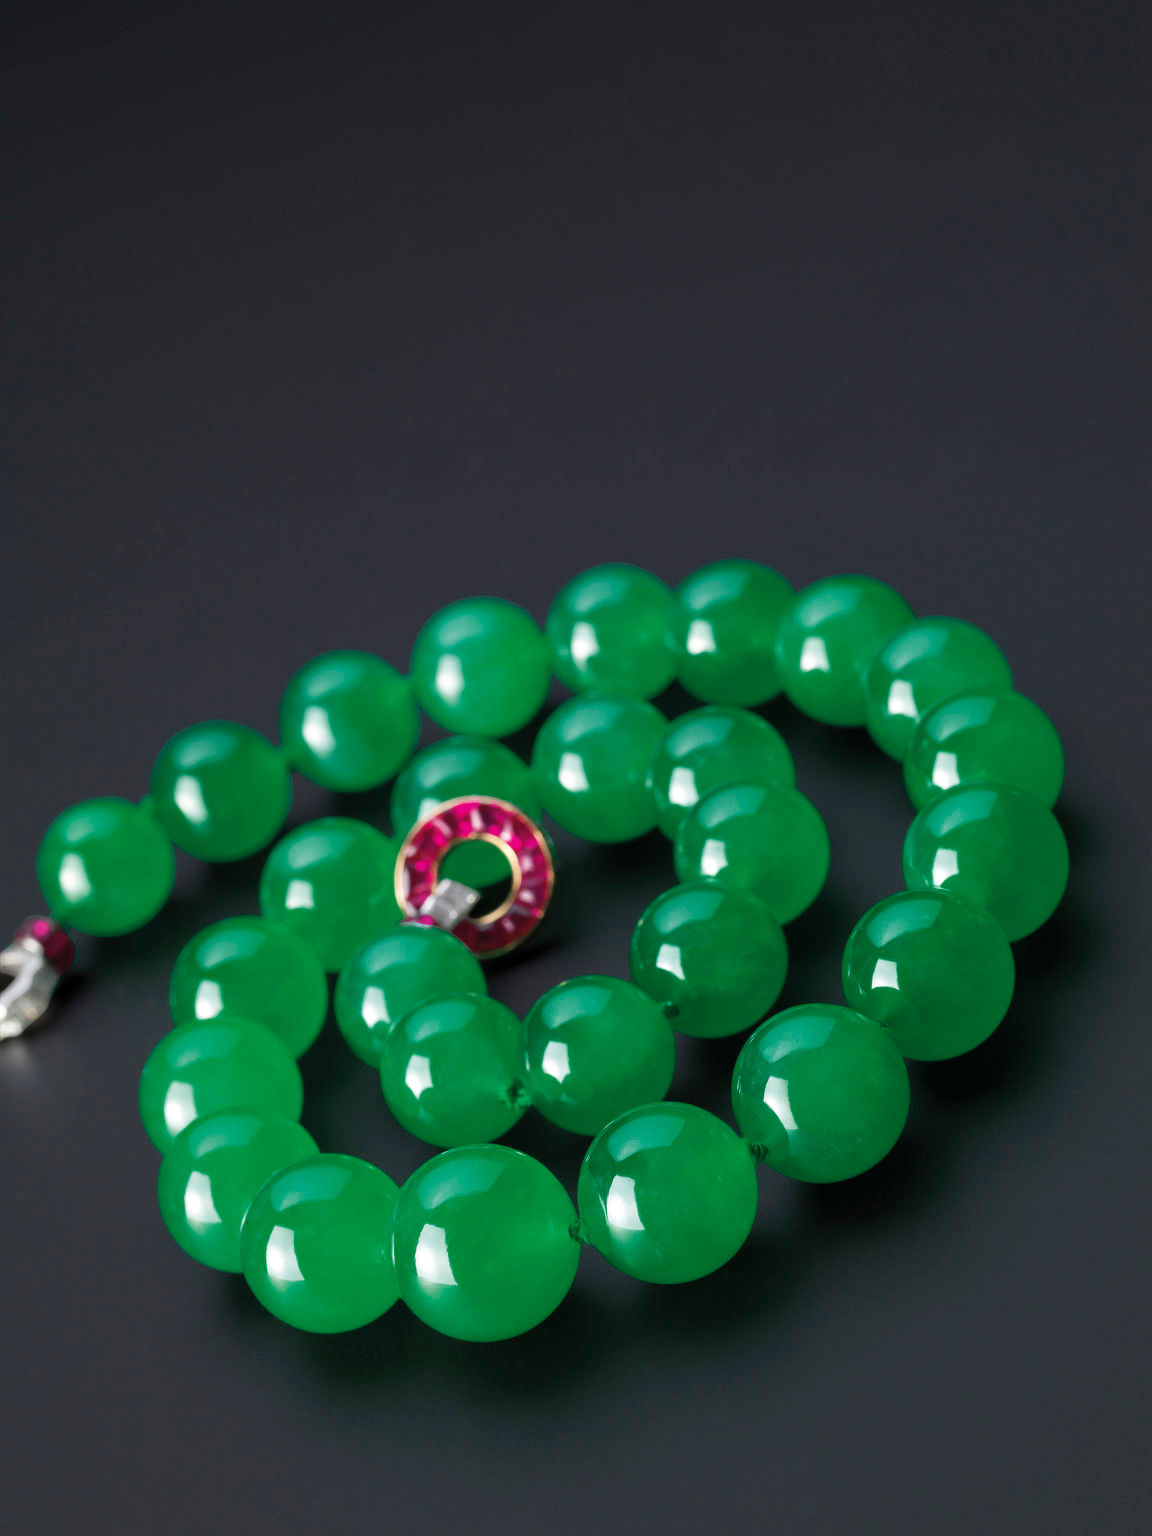 Wenhao Yu of Sotheby's on How to Grade Jade